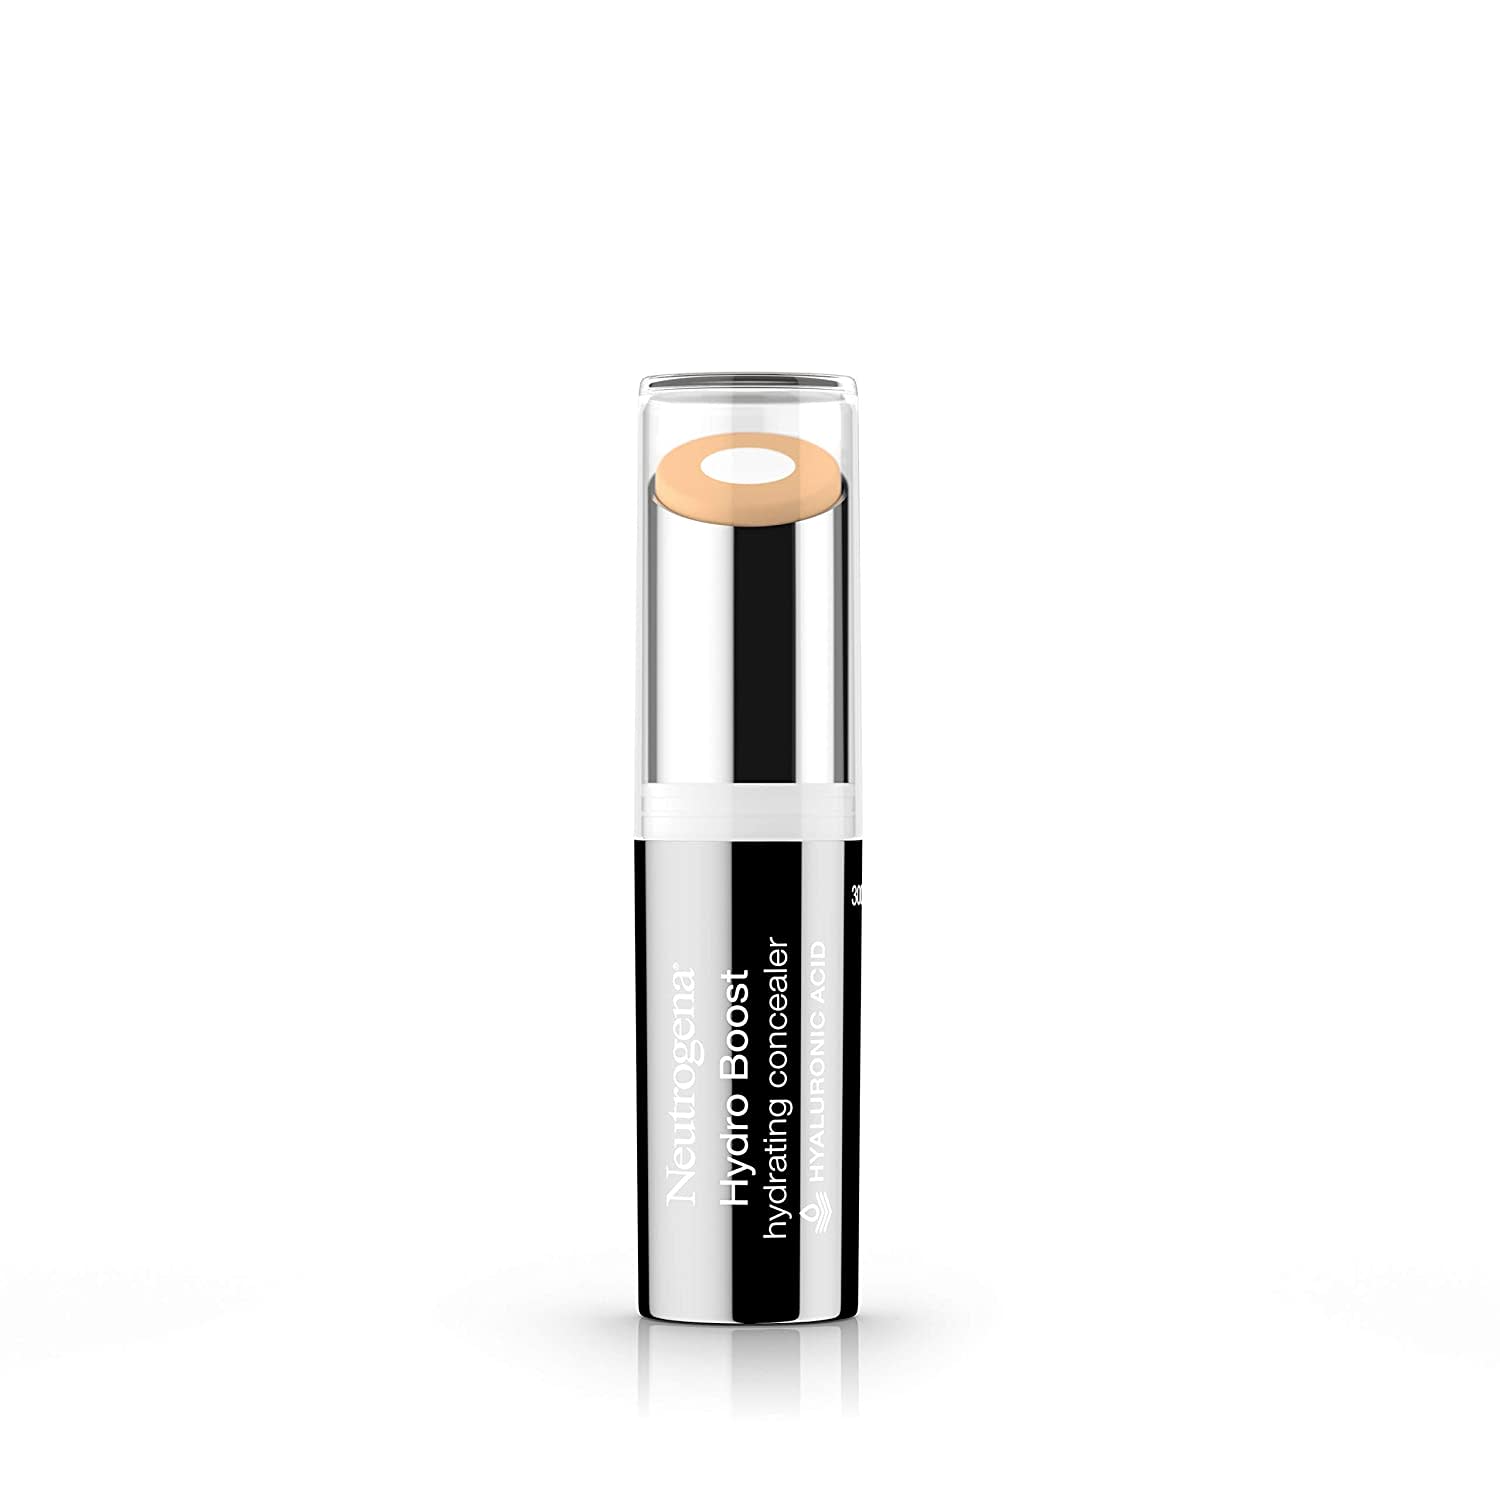 18 Best Concealers for Acne Skin in Malaysia 2021 - Top 